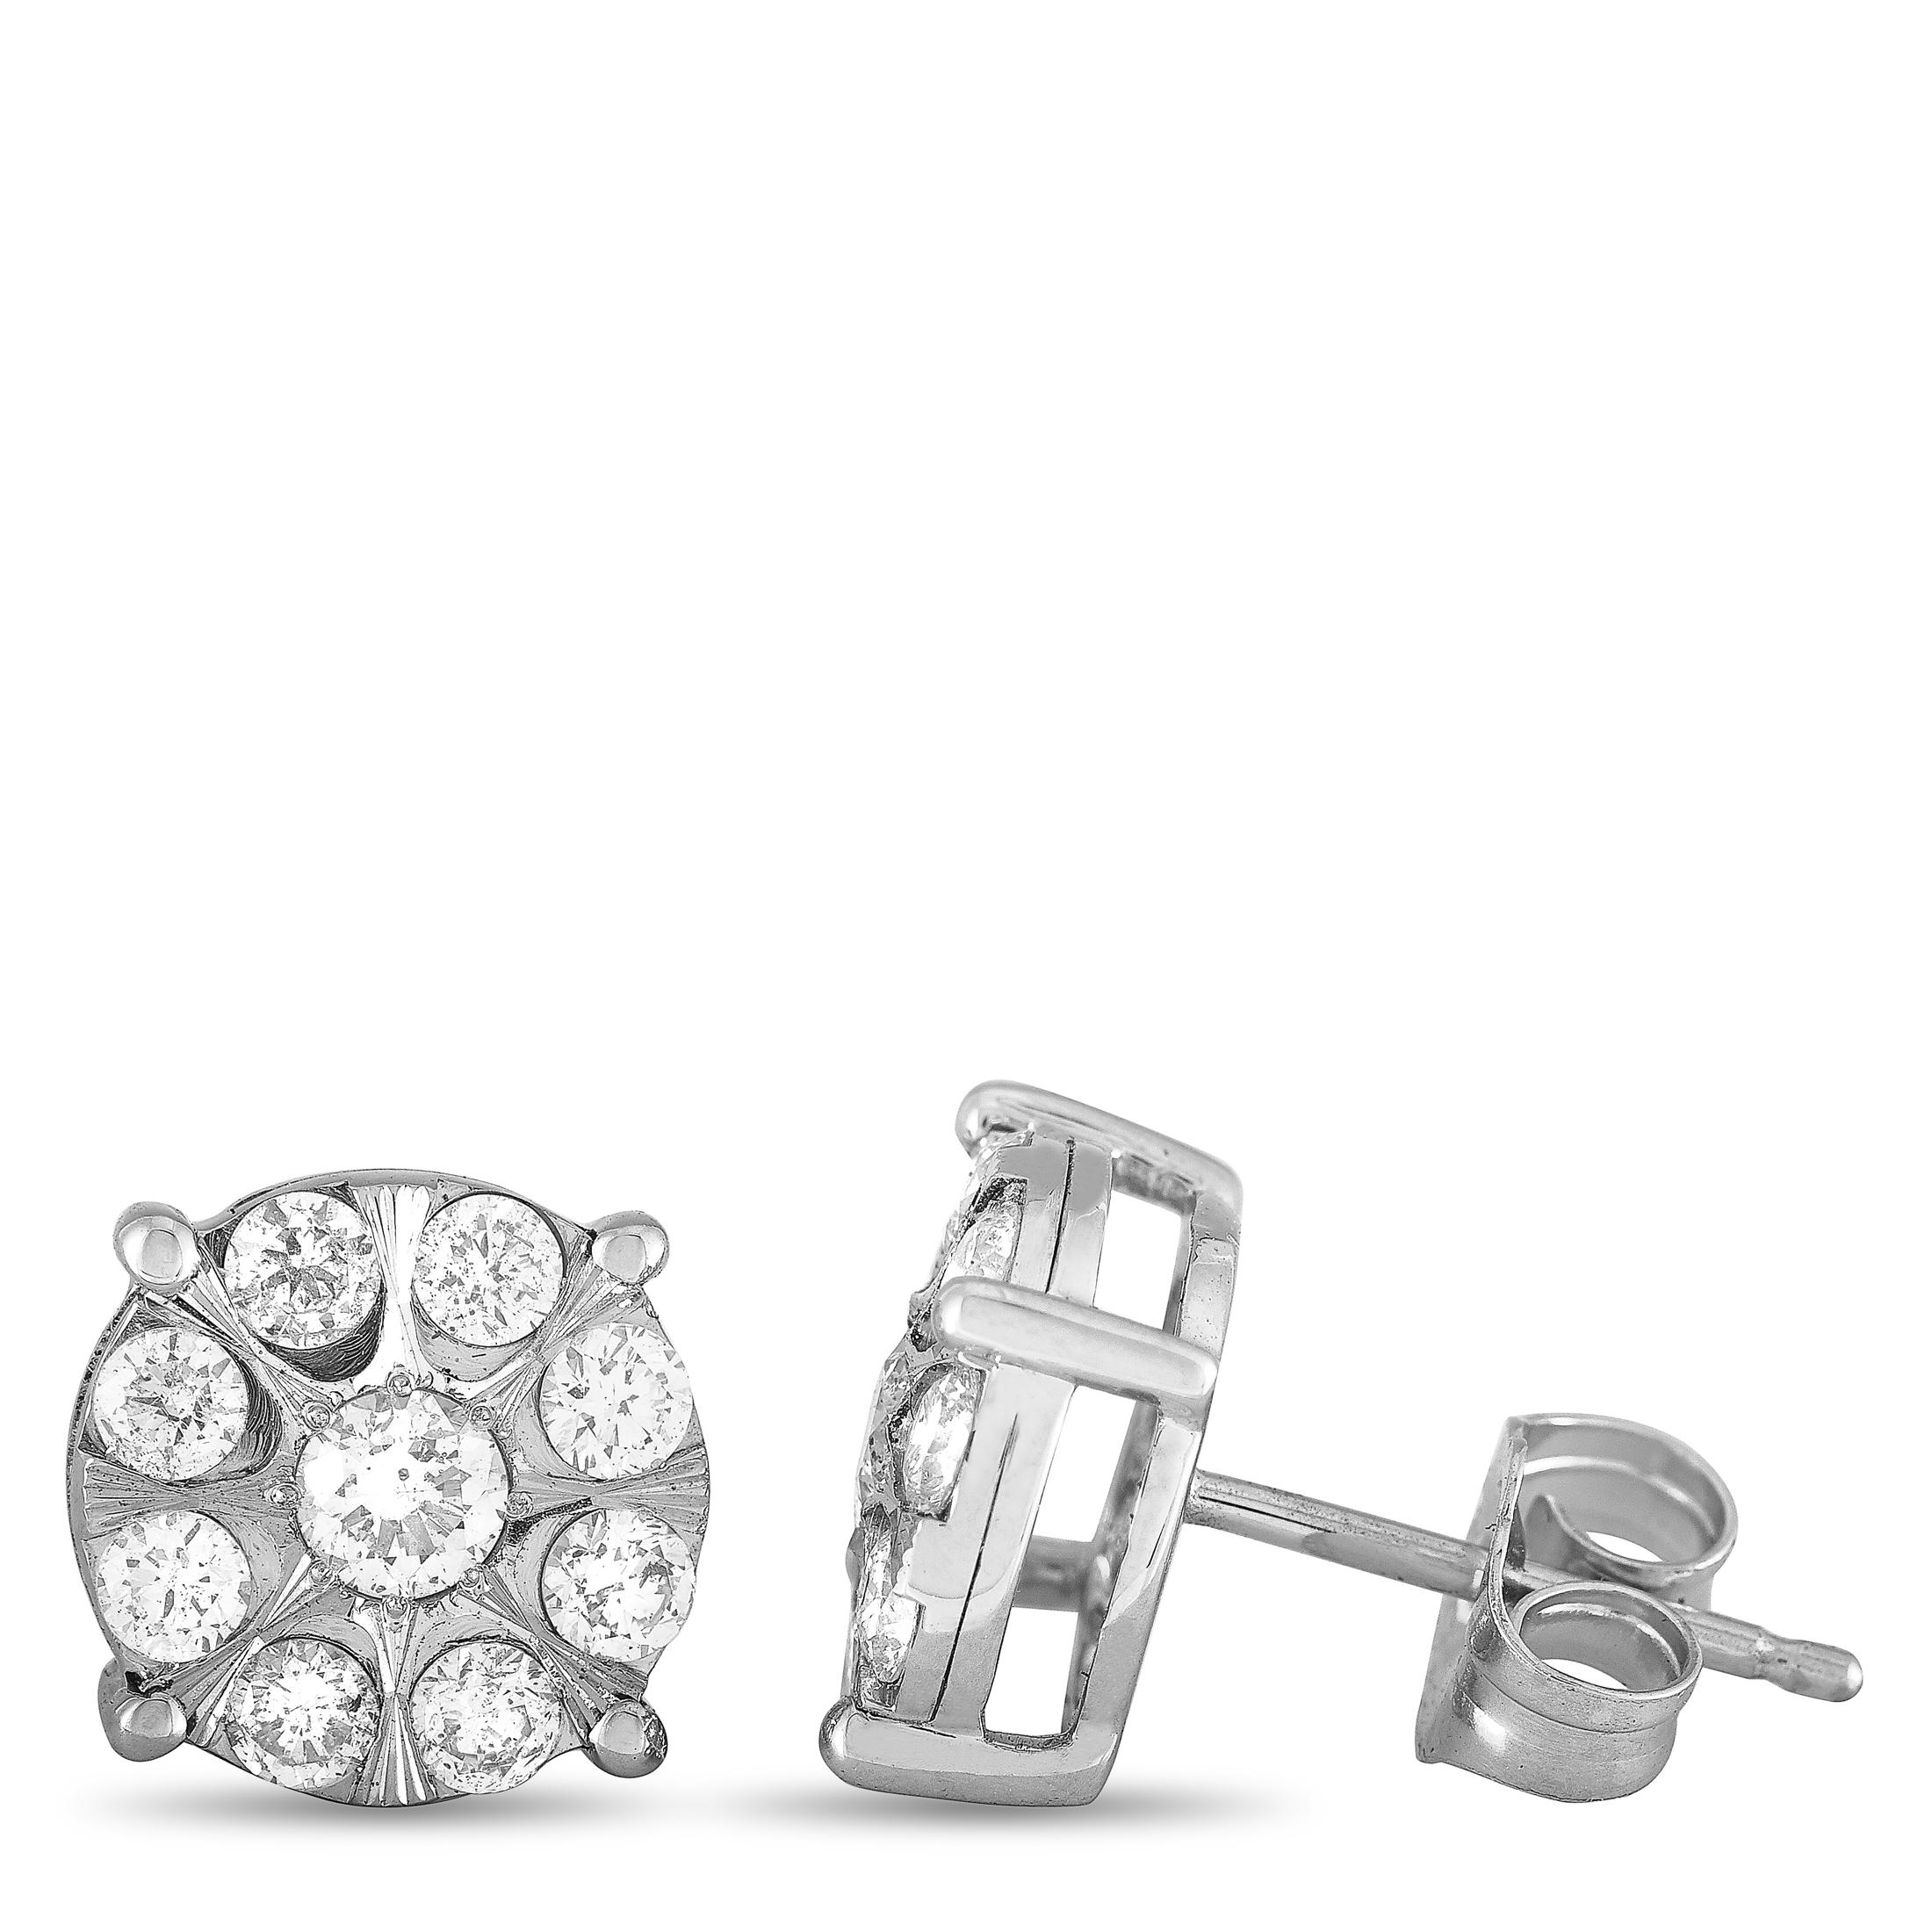 These LB Exclusive earrings are crafted from 14K white gold and set with a total of 0.75 carats of diamonds. The earrings measure 0.30” in length and 0.30” in width and each of the two weighs 1.15 grams.

Offered in brand new condition, this pair of